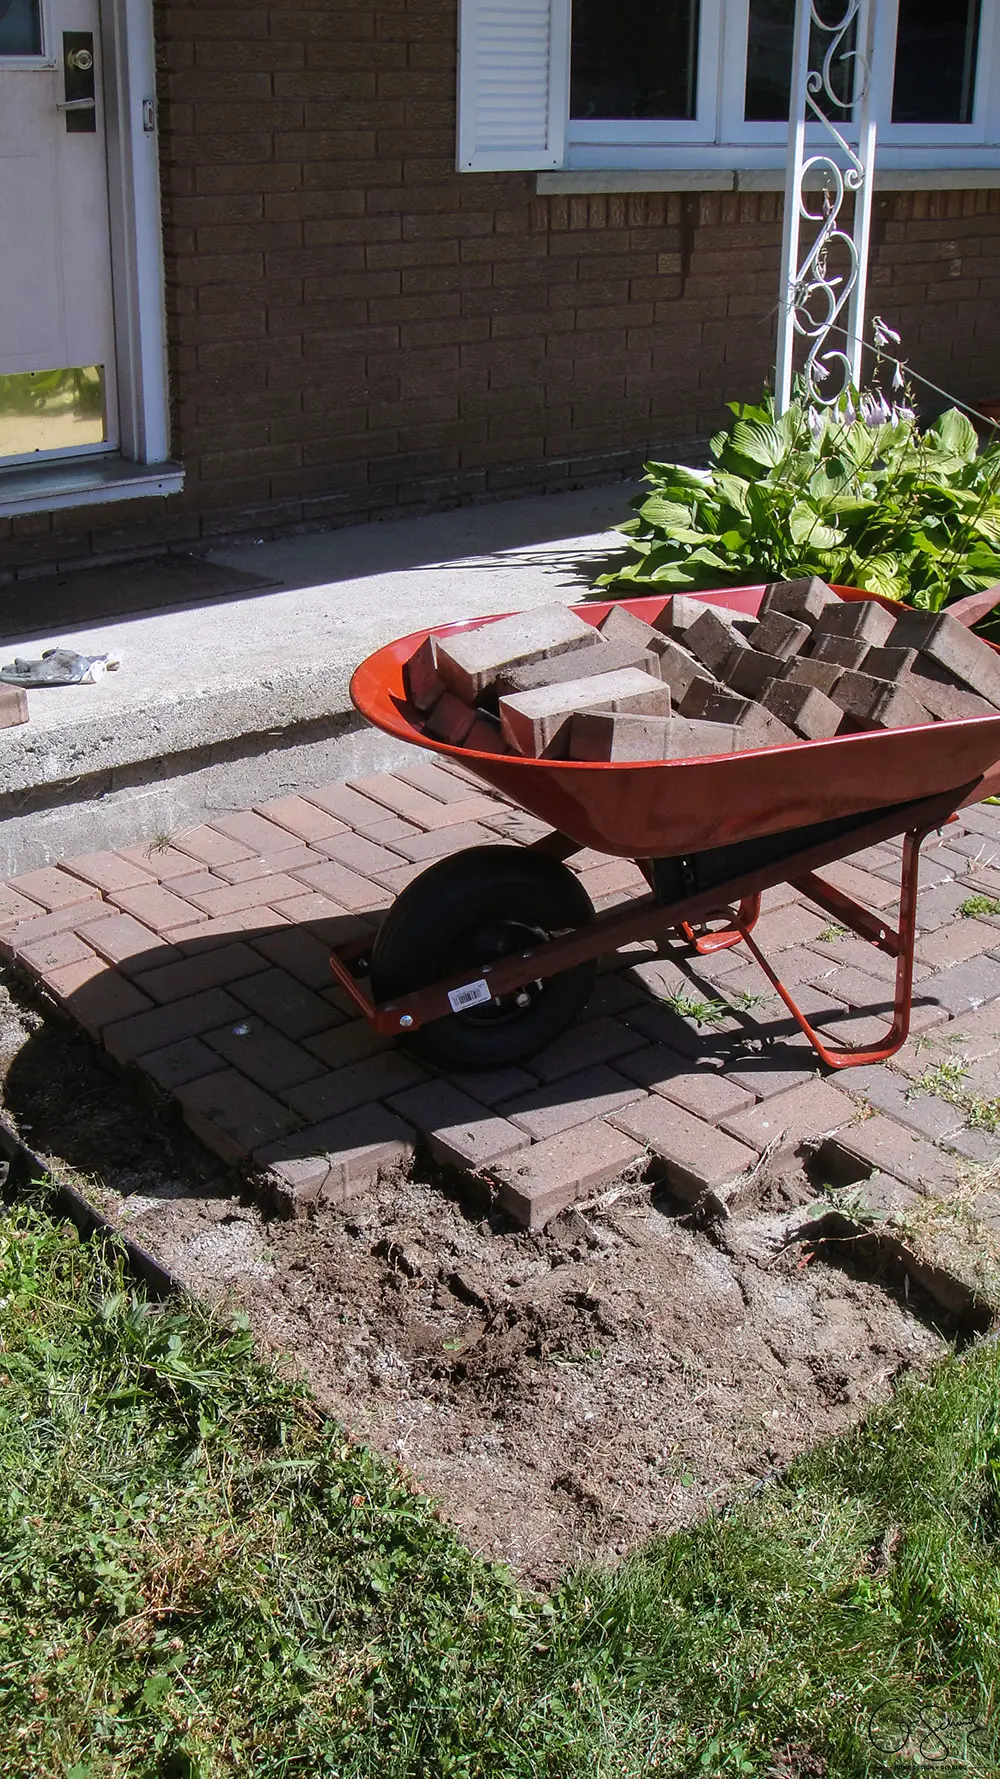 We’ve started our front walkway remodel, and the first step is removing patio stones. If you’re planning on doing a DIY walkway project this summer, these tips are for you! 